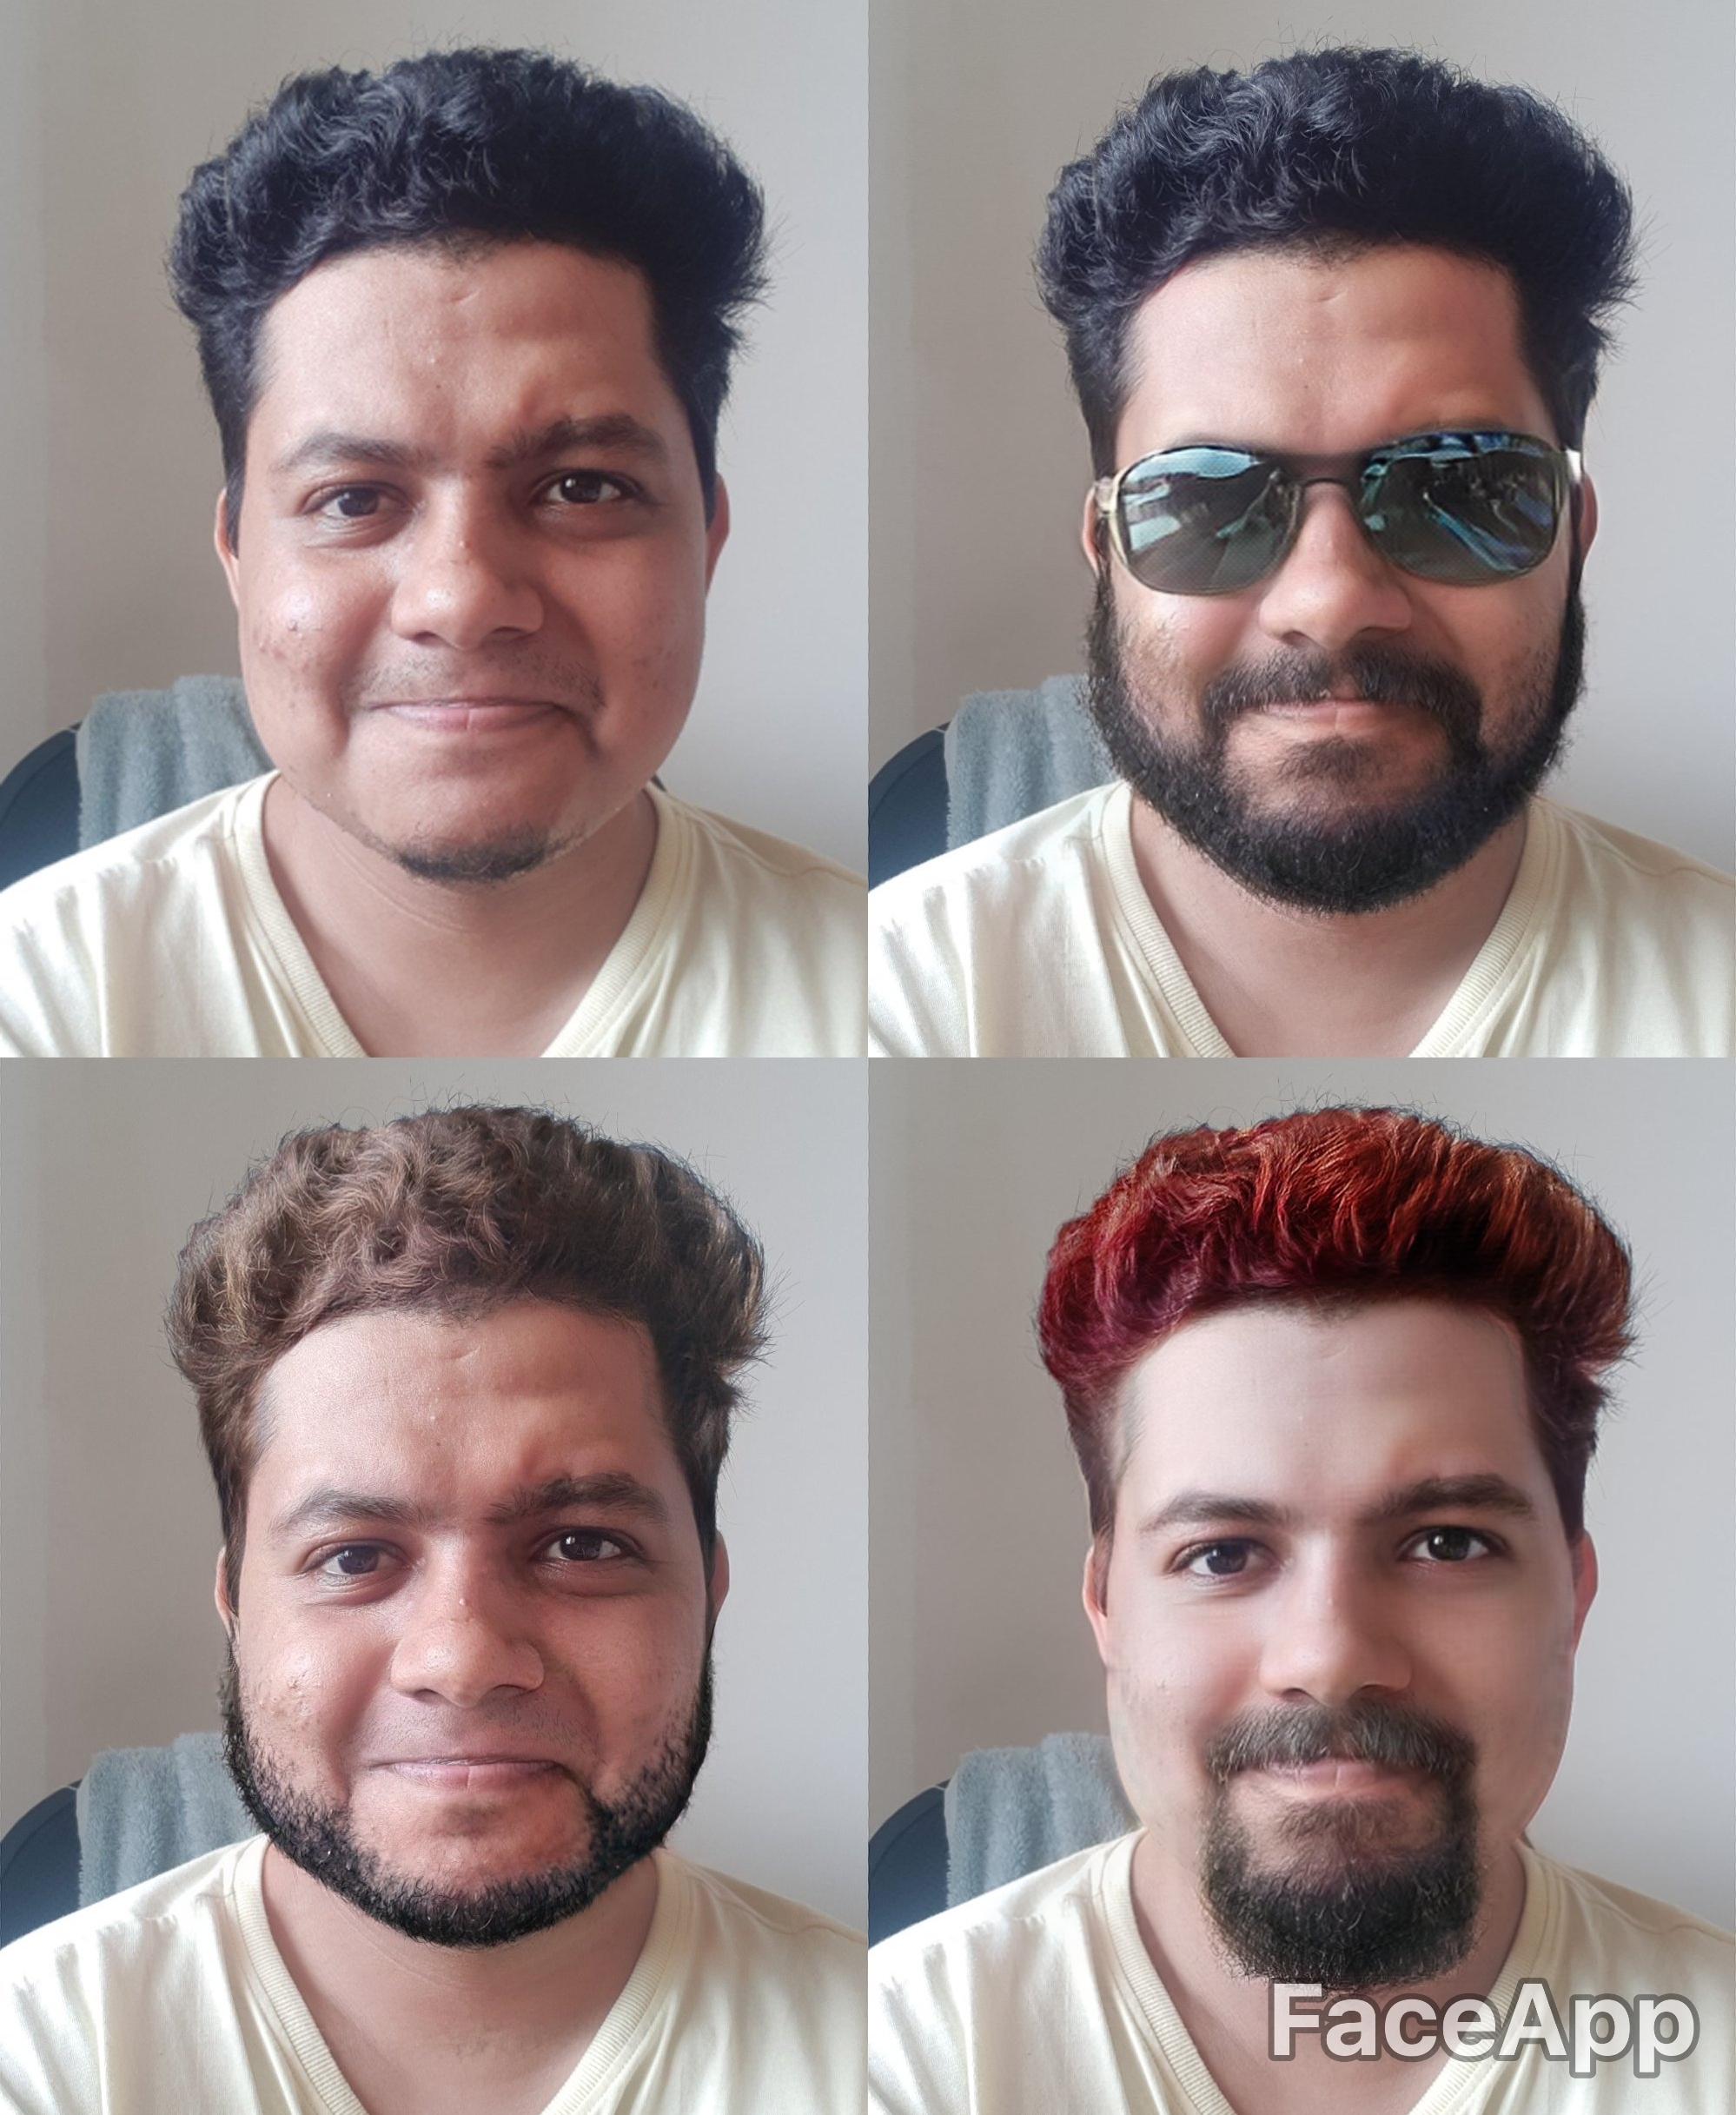 How to Get Old Age Filter